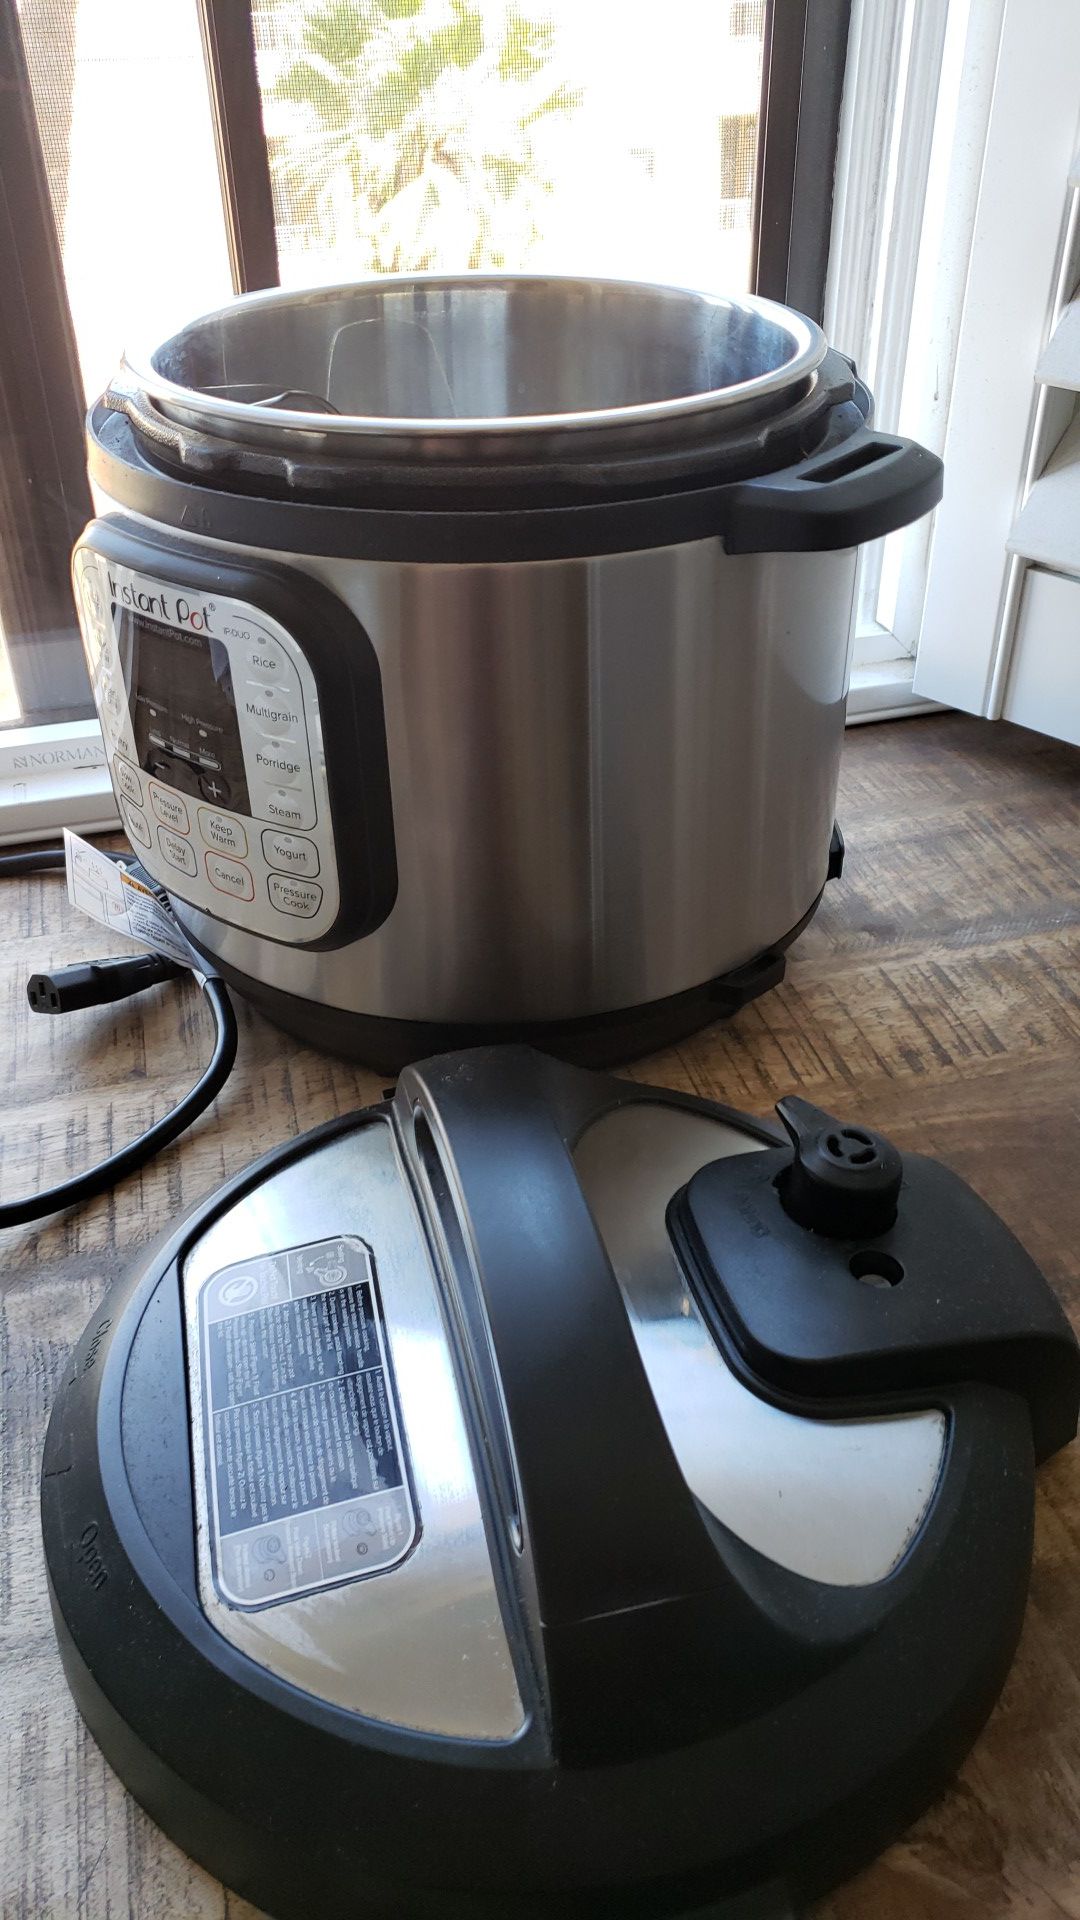 Instant Pot nearly new 8 quart large